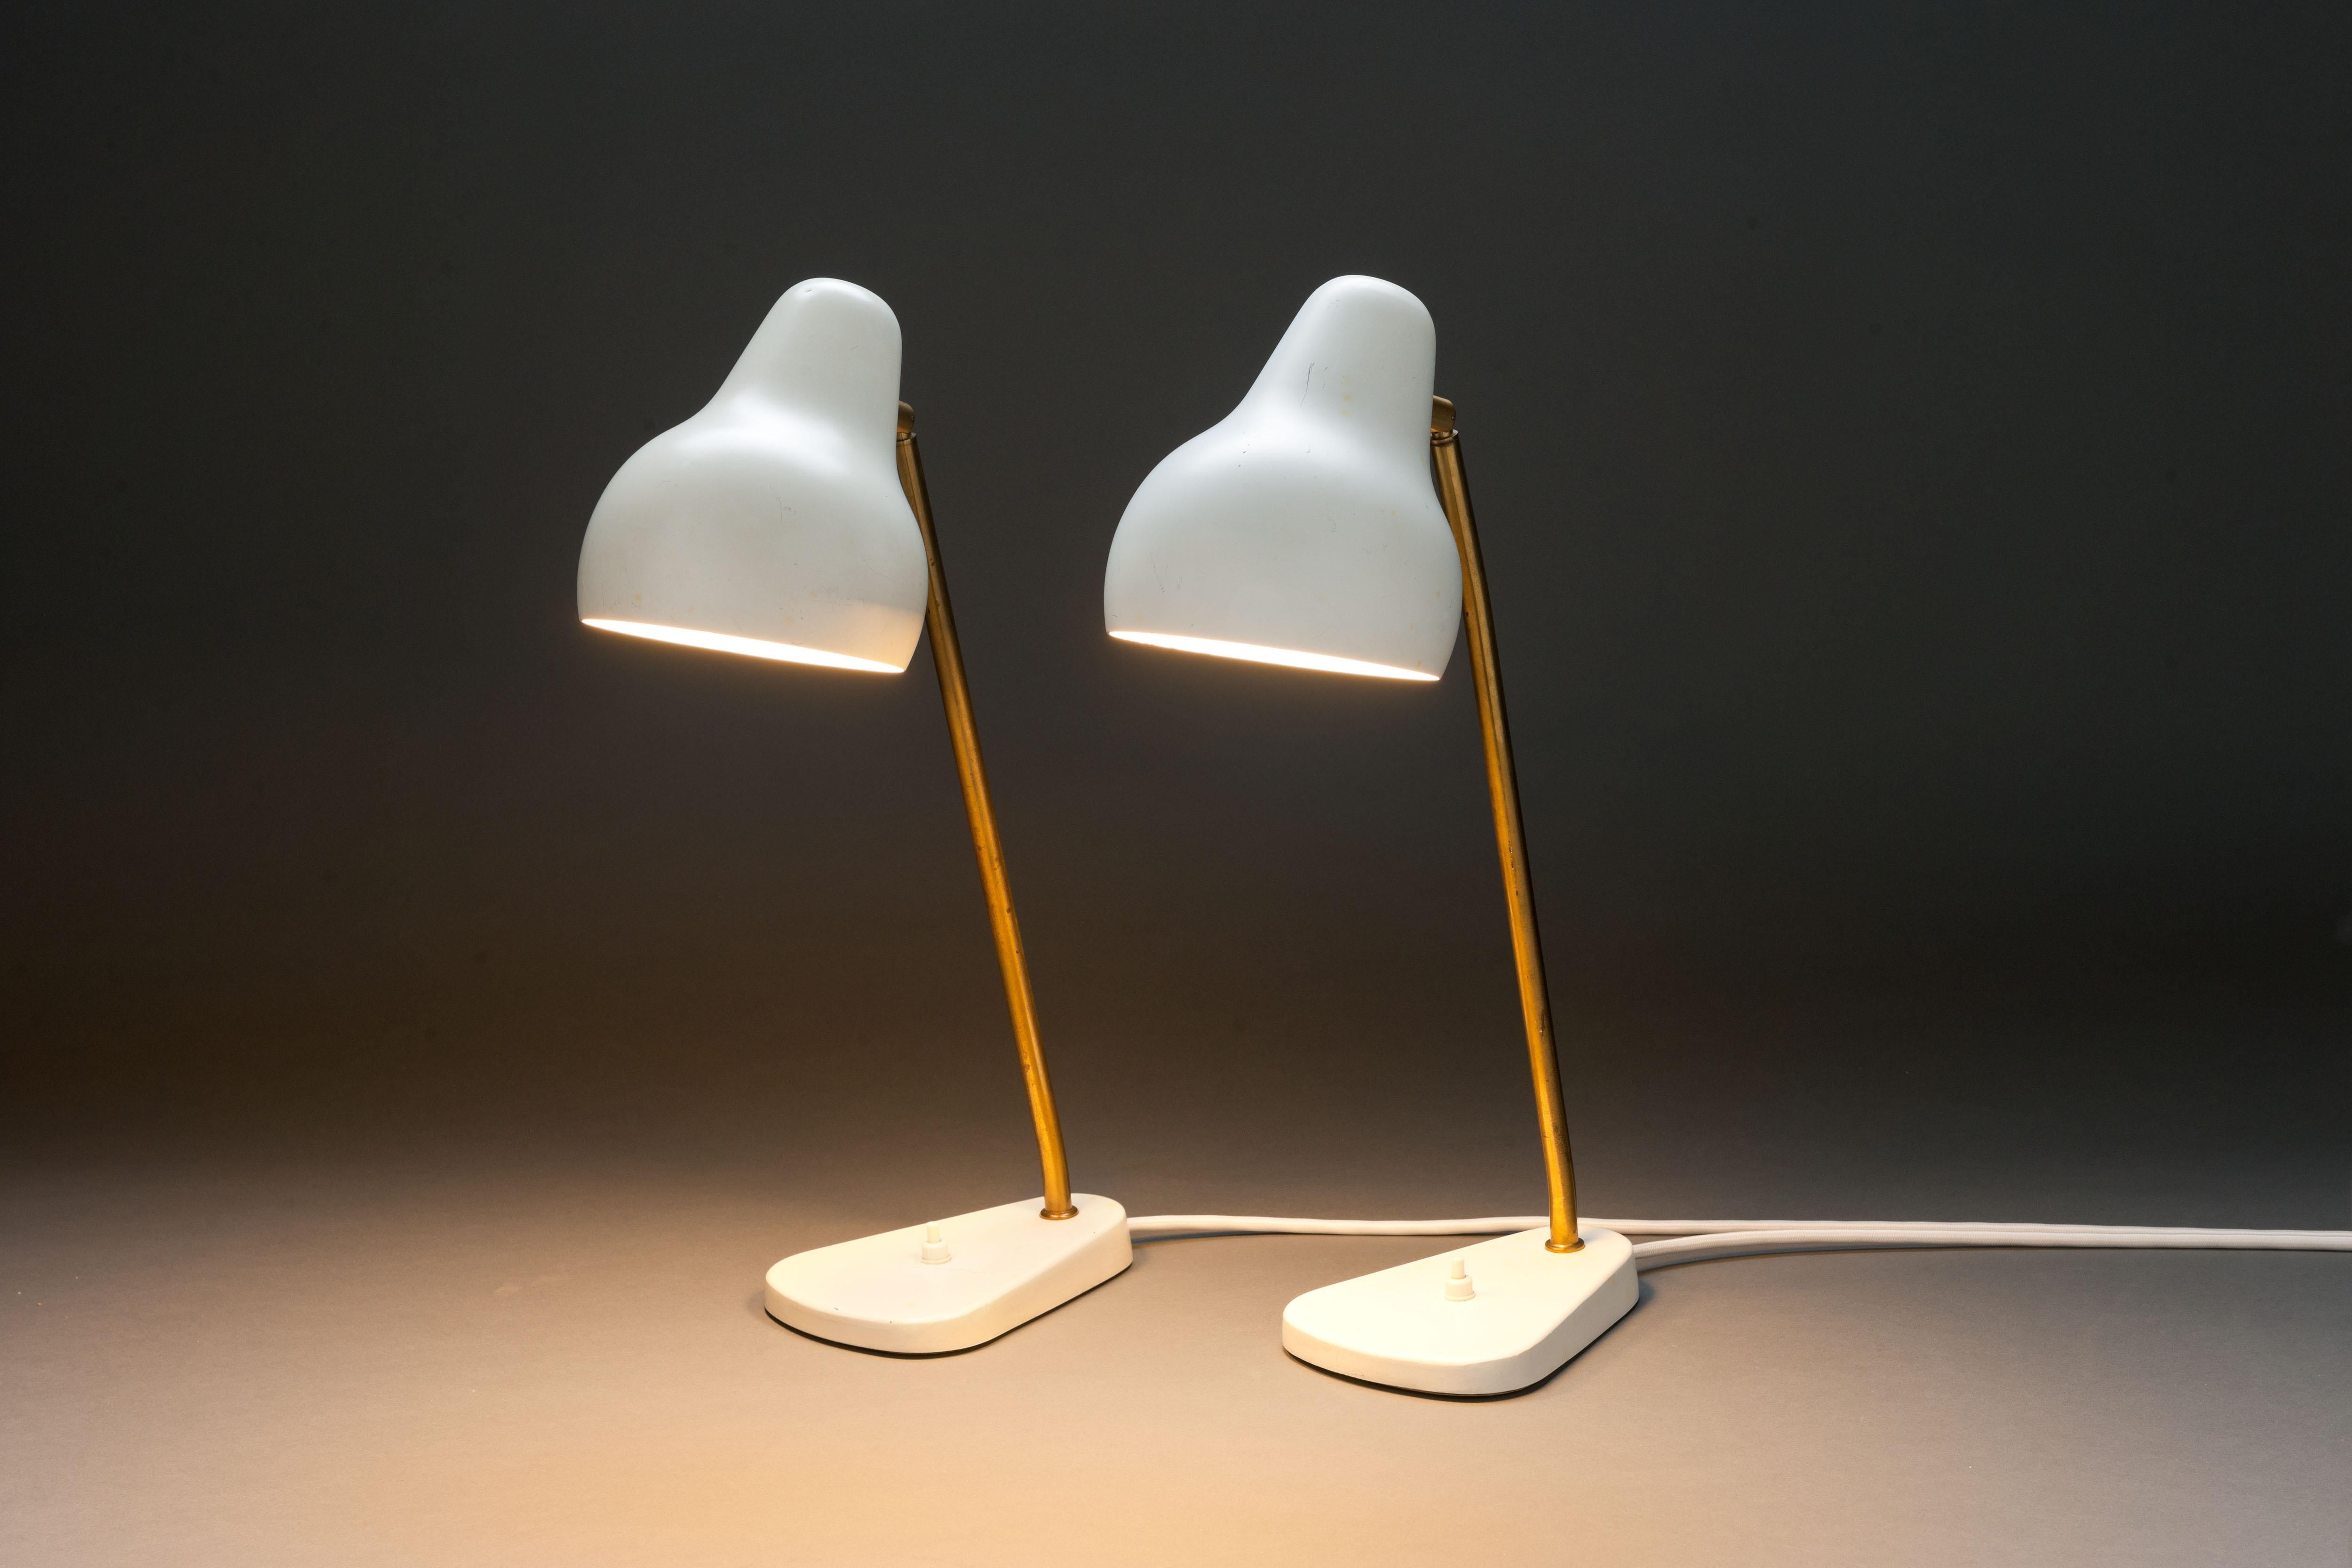 Set (2) early, 1950's - edition table lamps by the Danish designer and architect Vilhelm Lauritzen (1894 - 1984), made by Louis Poulsen, Denmark.
Organically shaped matt white steel hood on a brass stem with ball joint that allows the hood to be